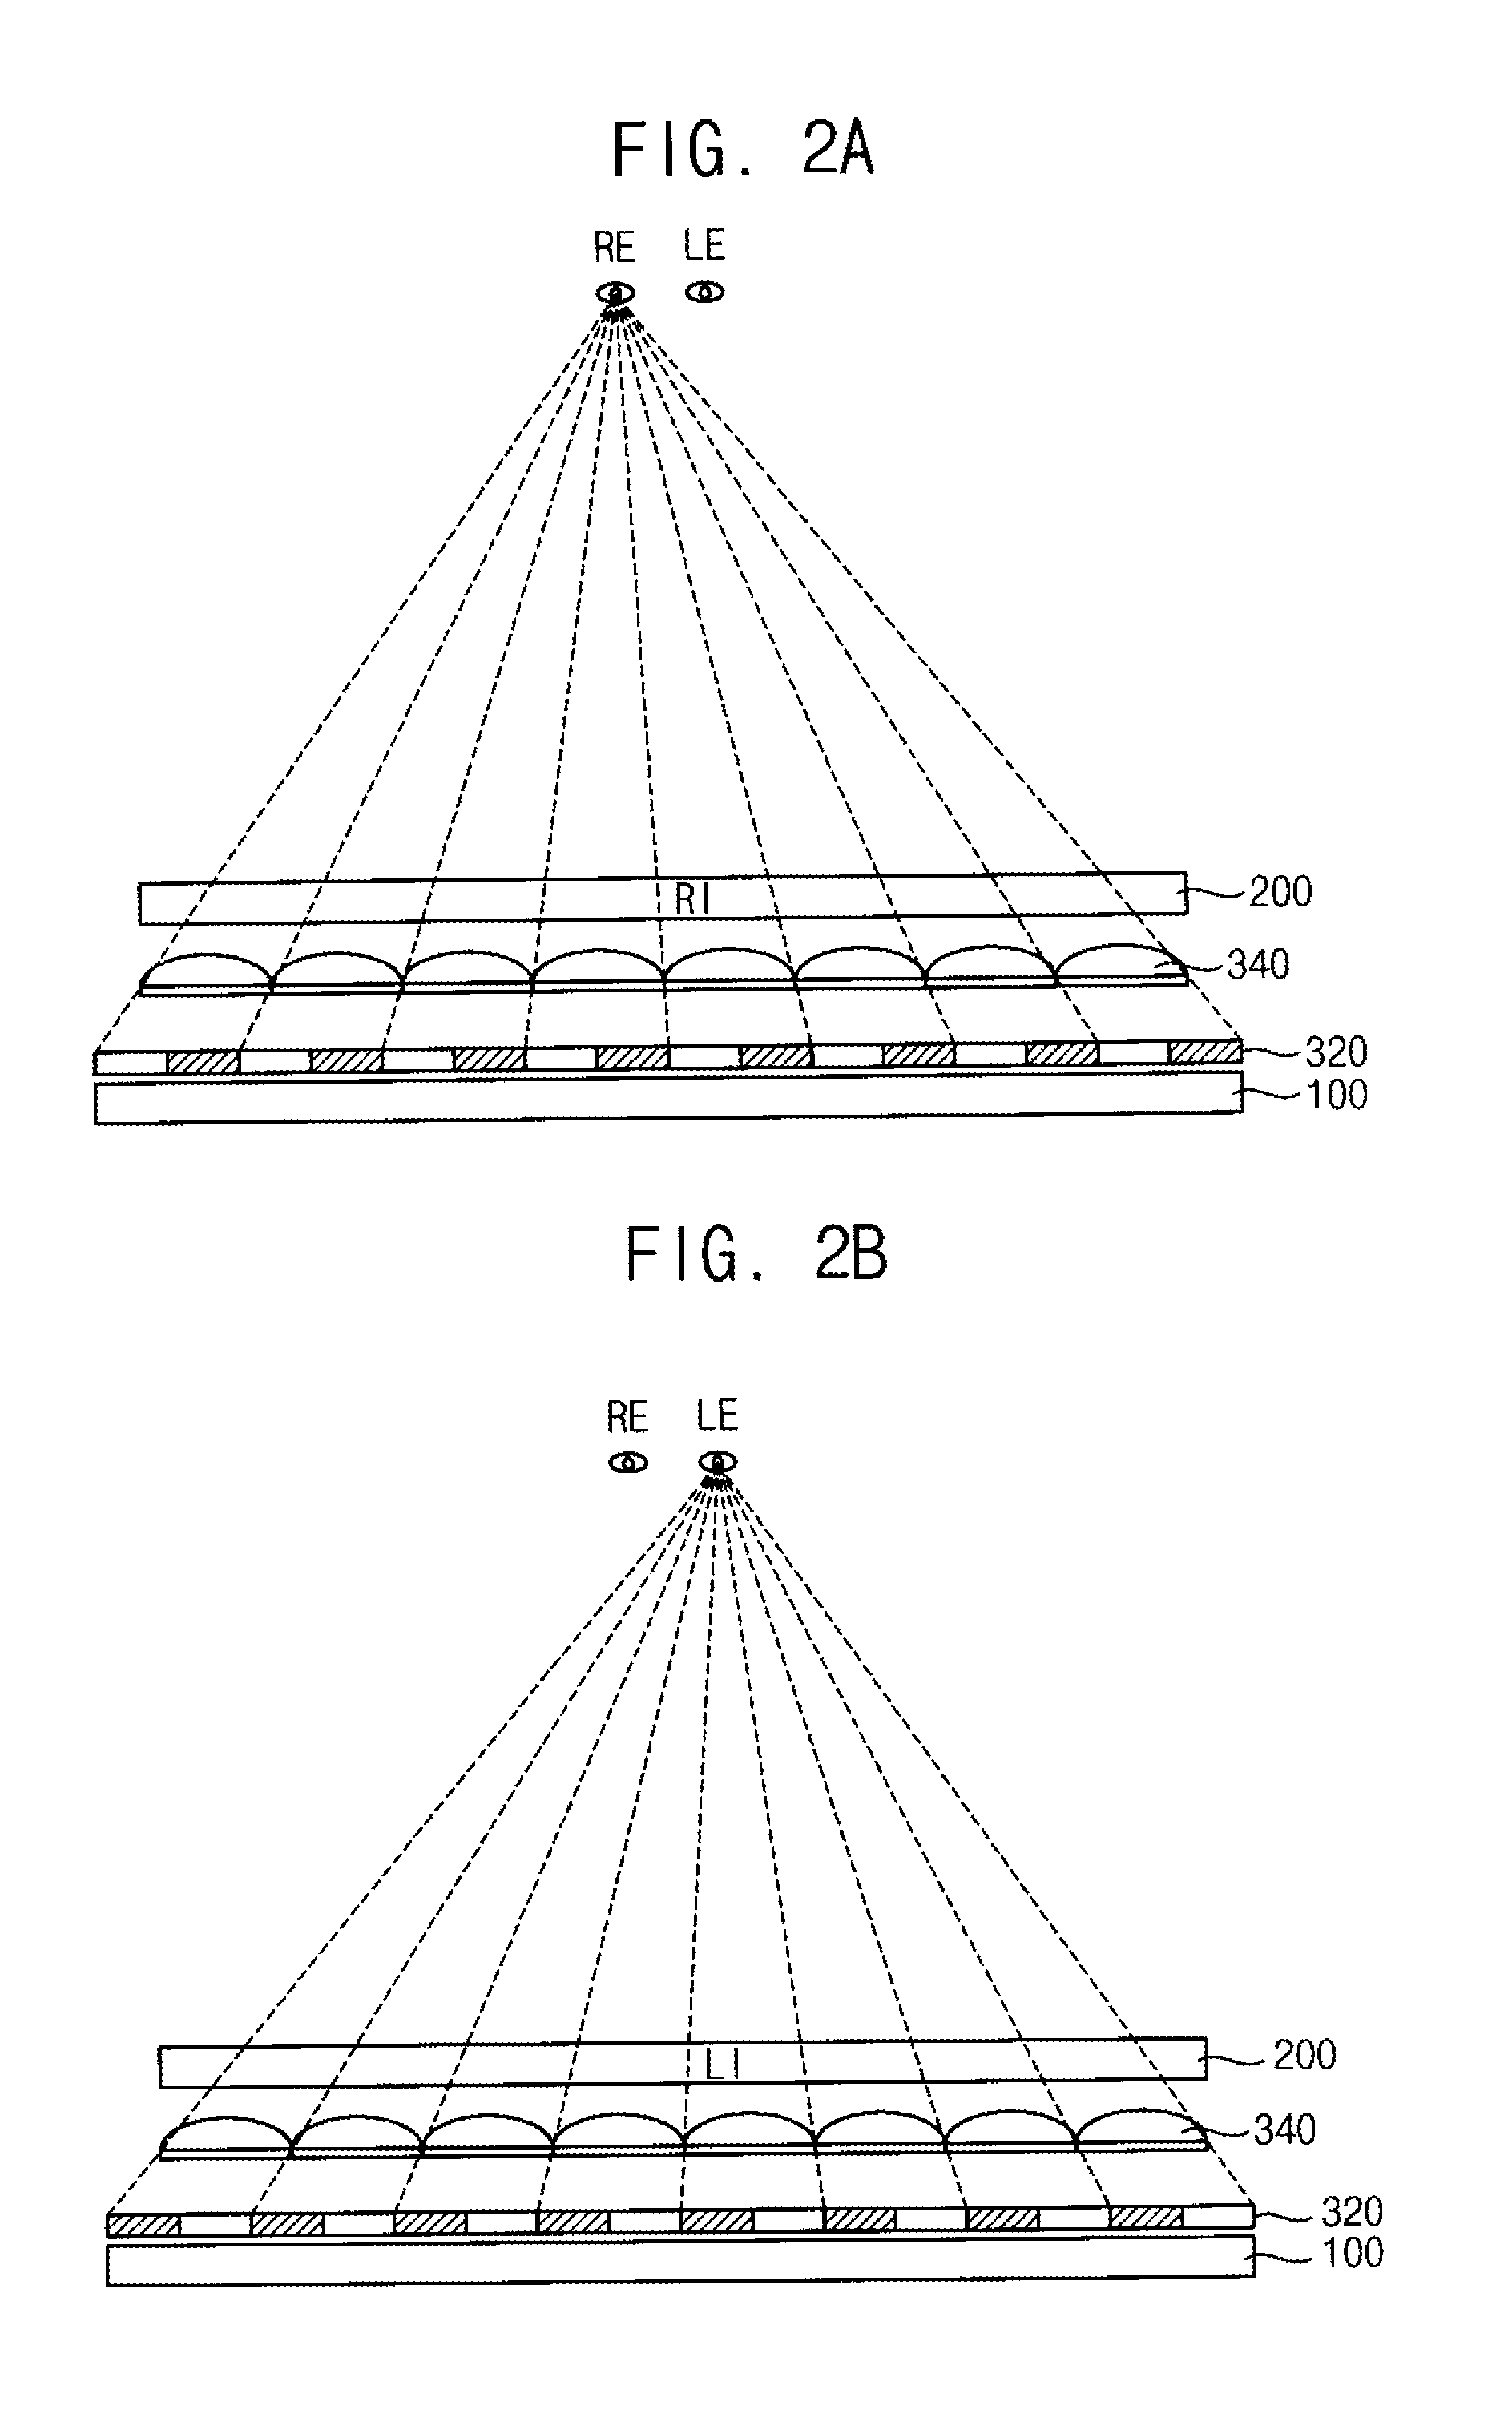 Display apparatus and method of displaying three dimensional images using the same